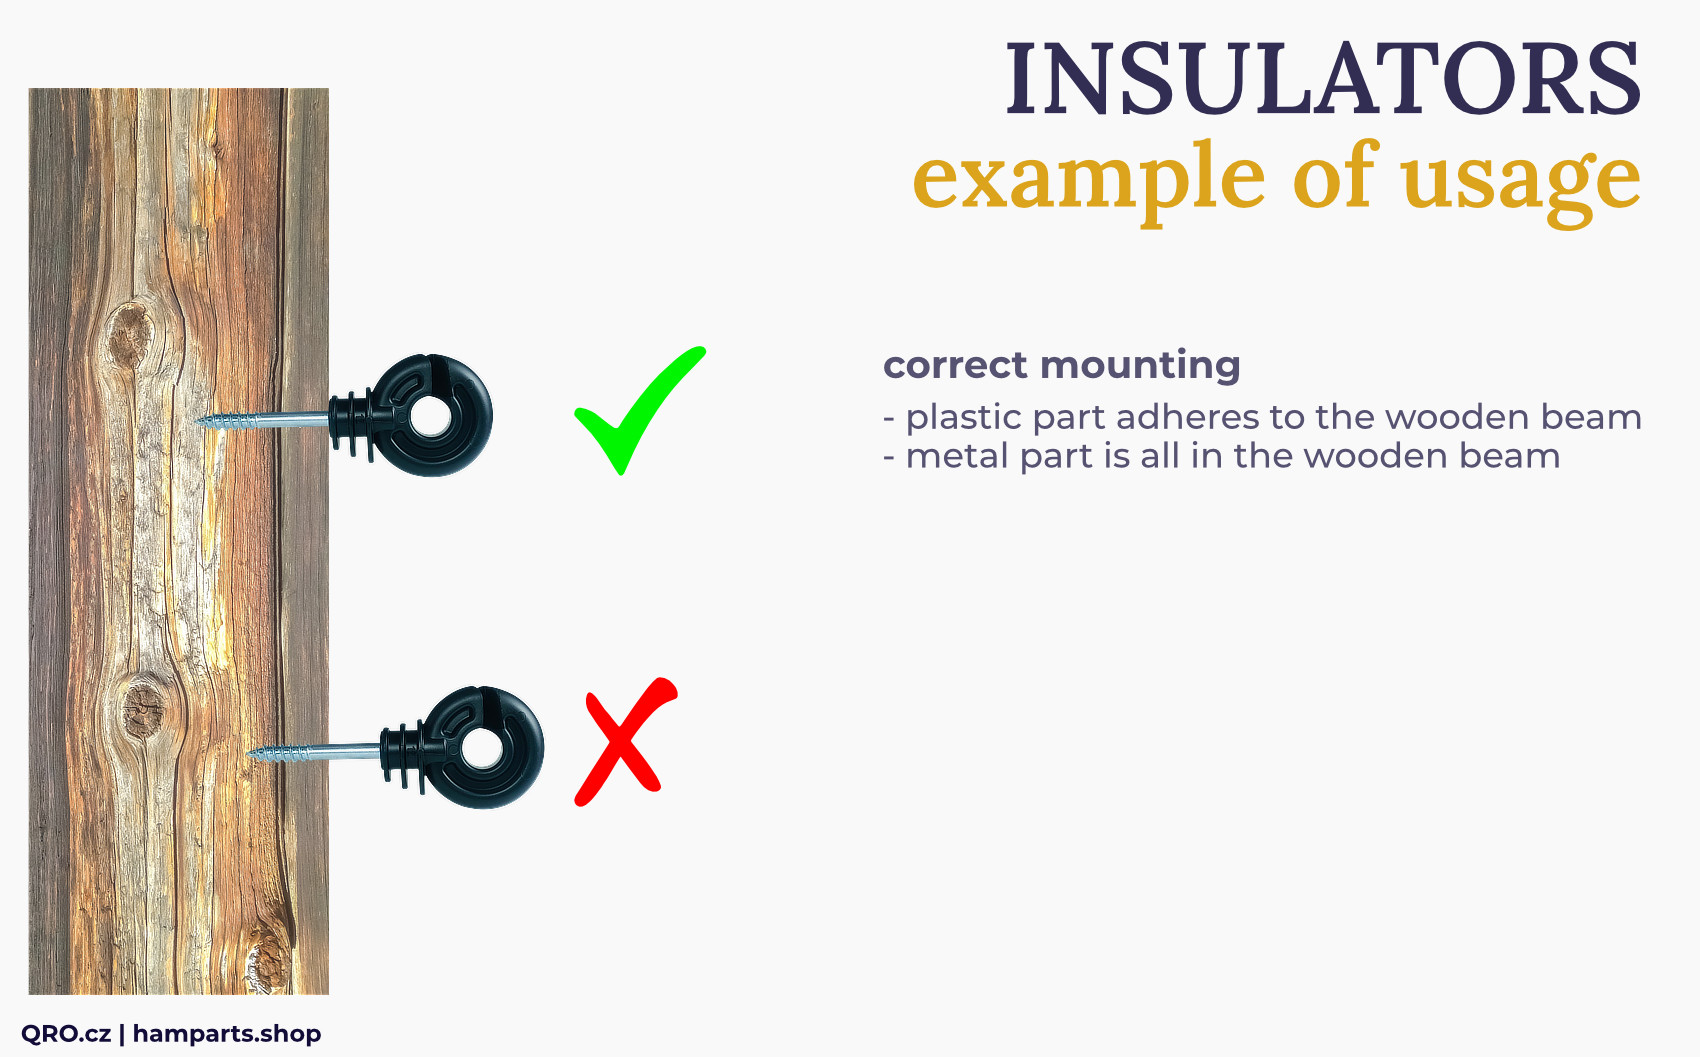 example of mounting the insulators by qro.cz hampart.shop